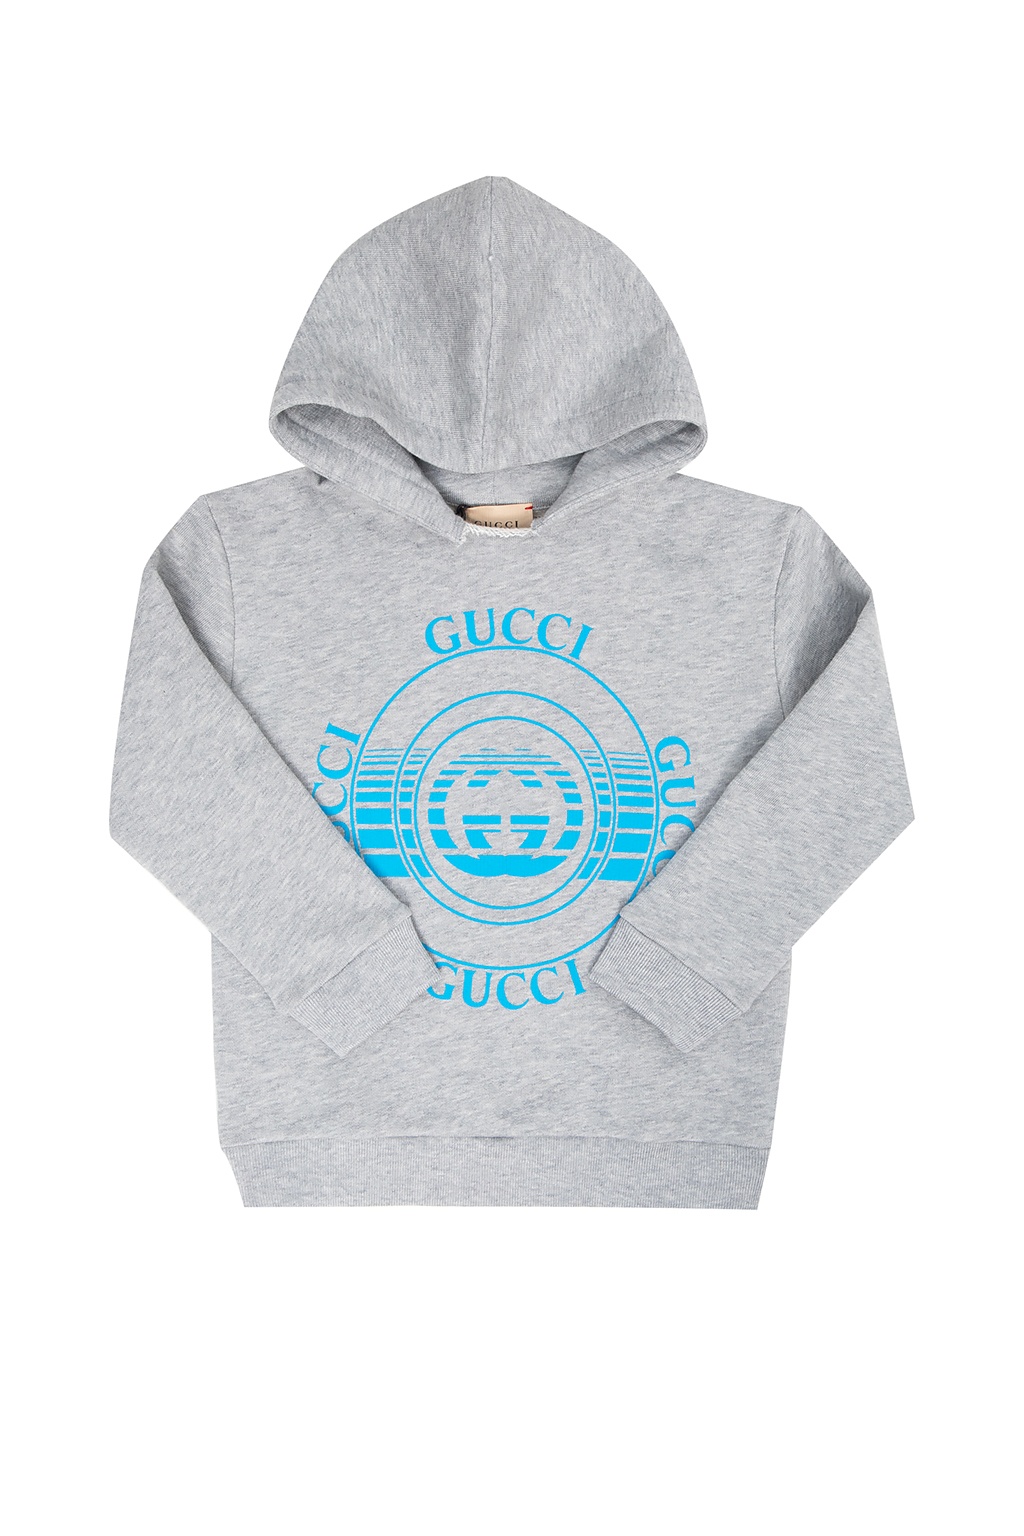 gucci toddler hoodie